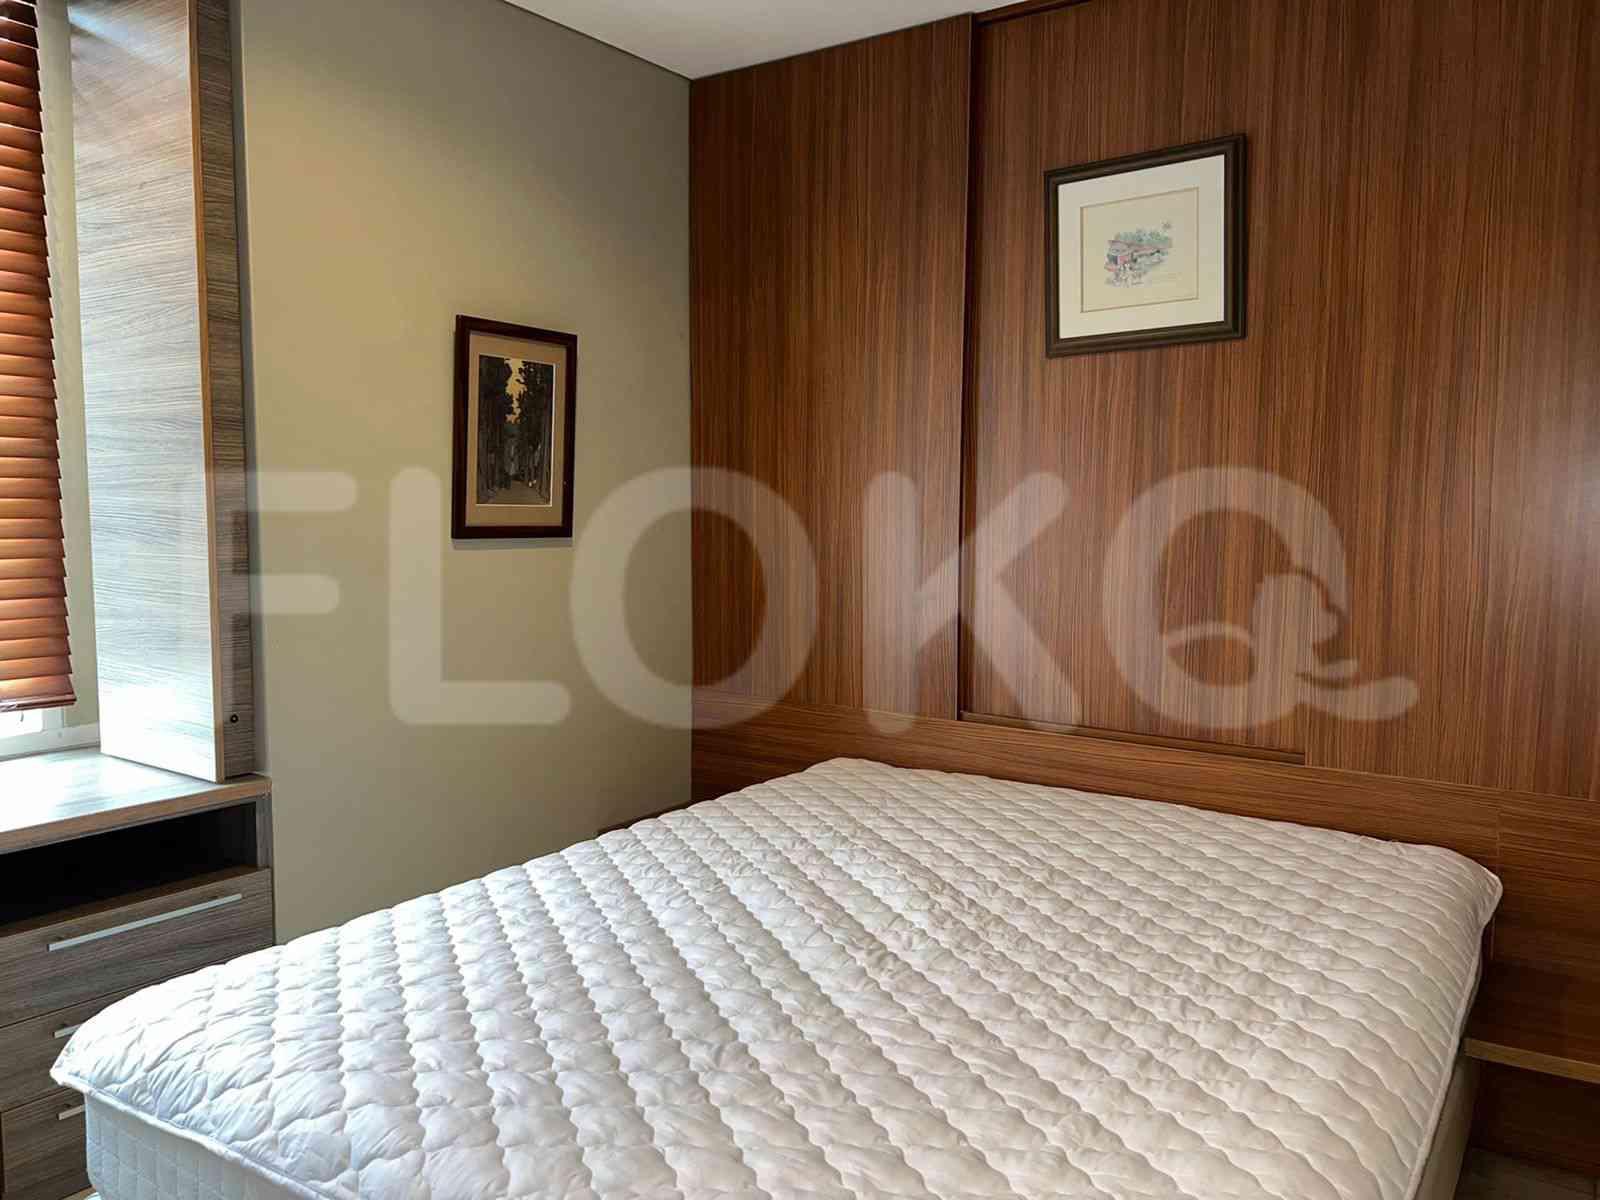 2 Bedroom on 16th Floor for Rent in FX Residence - fsud97 7